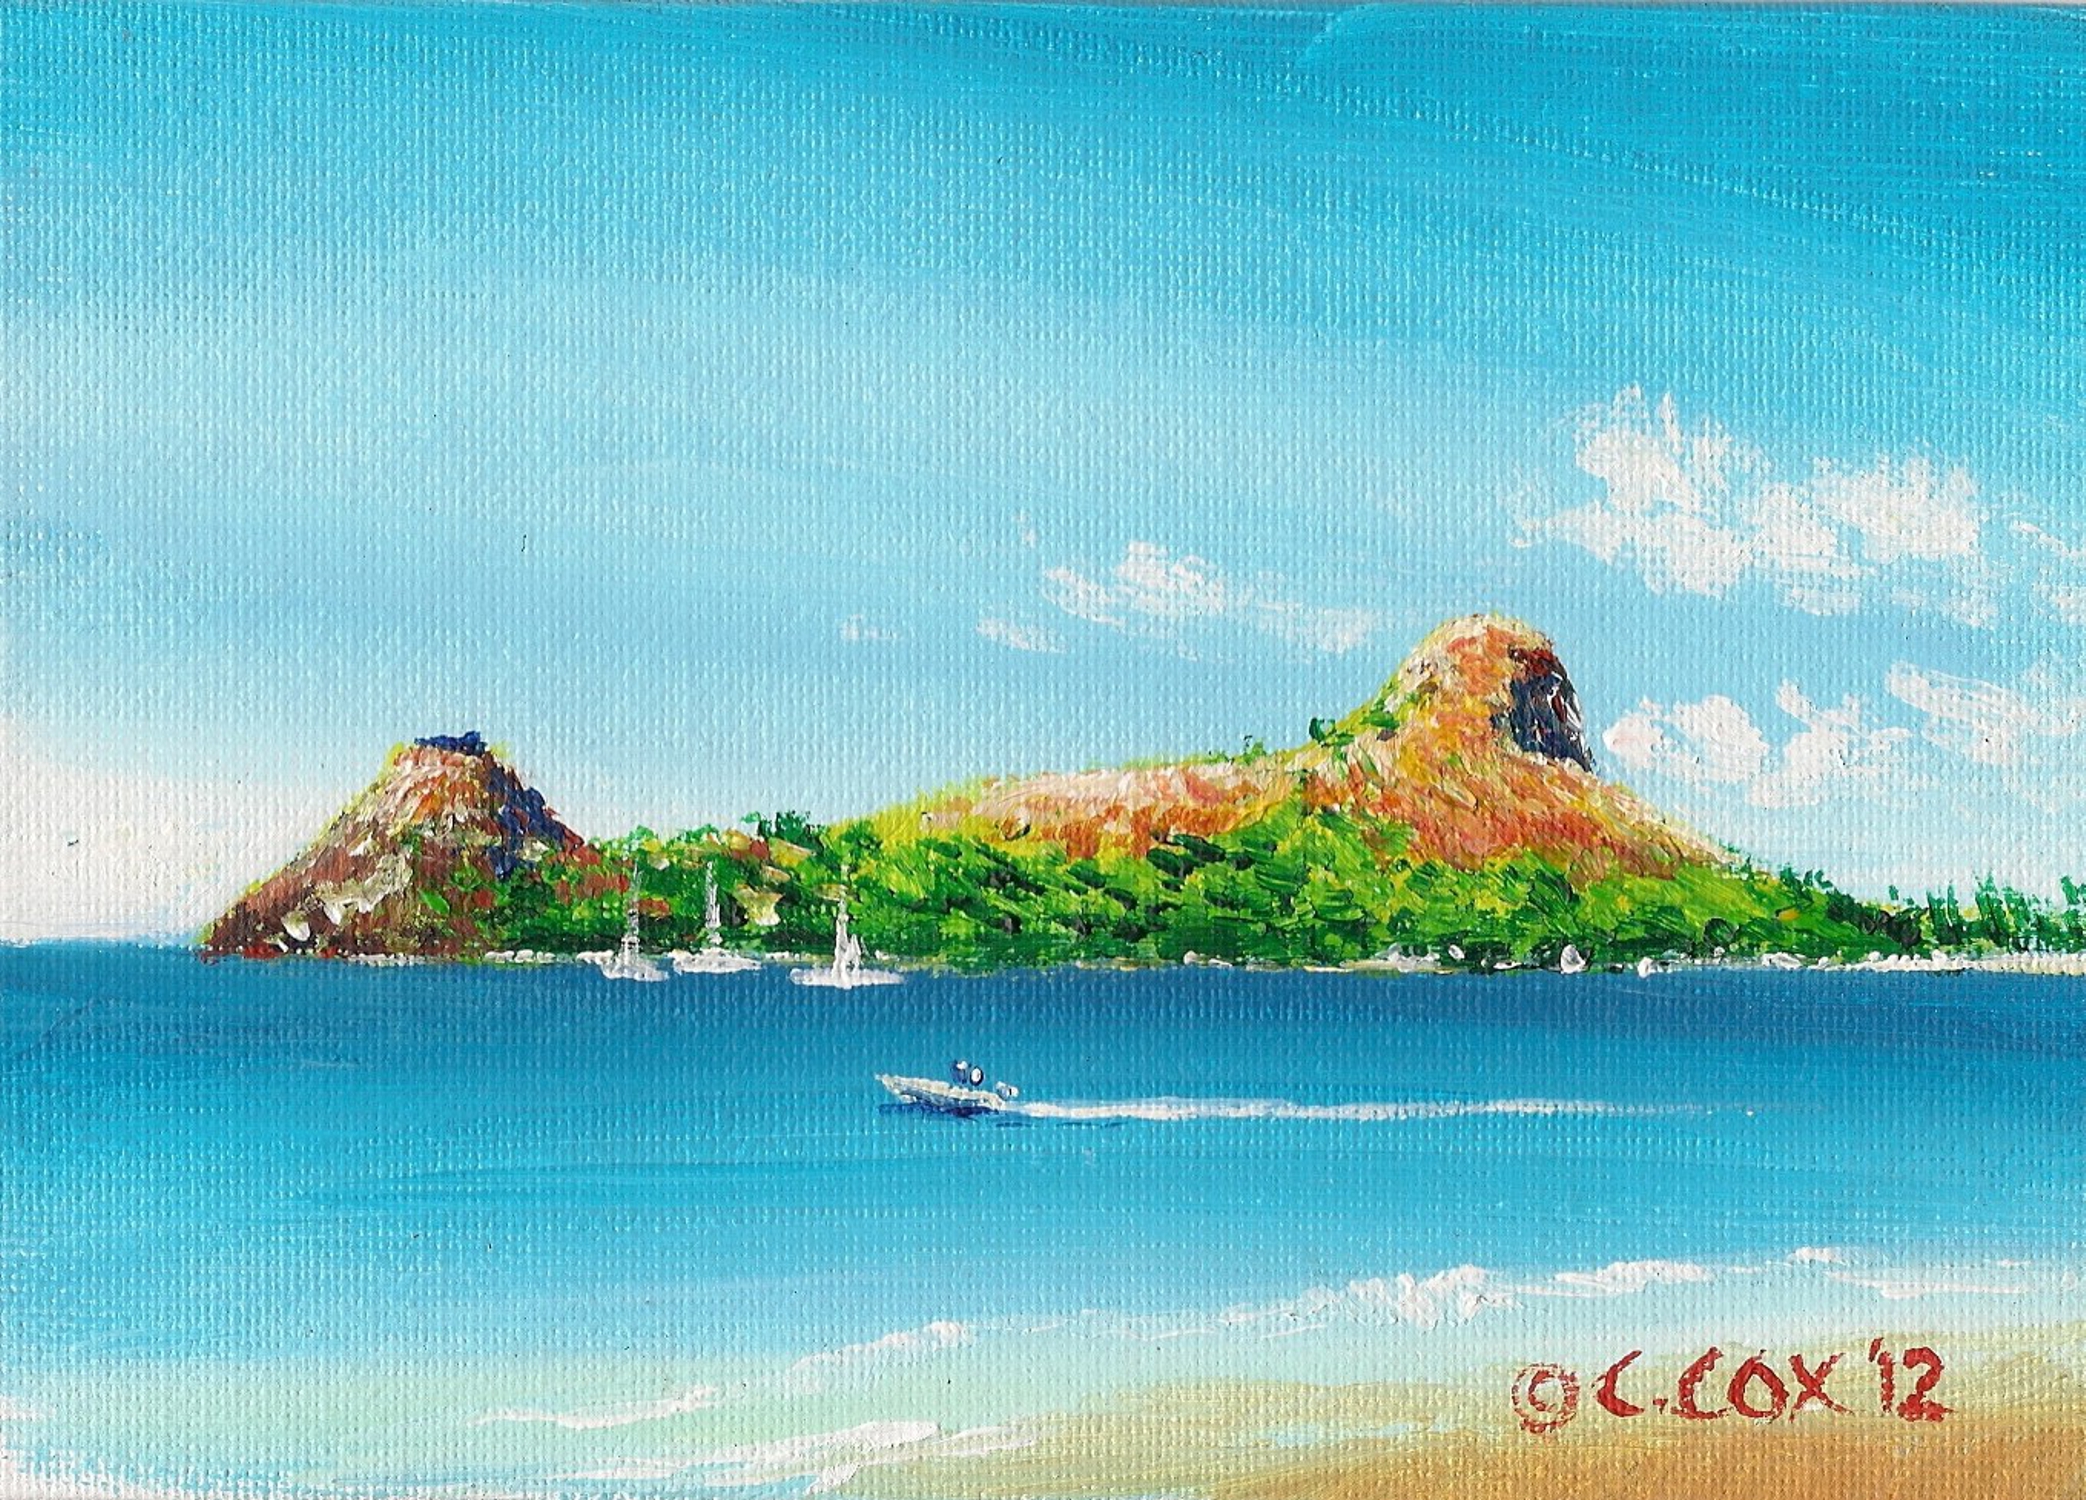 'Perfect Day' Pigeon Island, St. Lucia, Acrylic on canvasboard, 5x7"